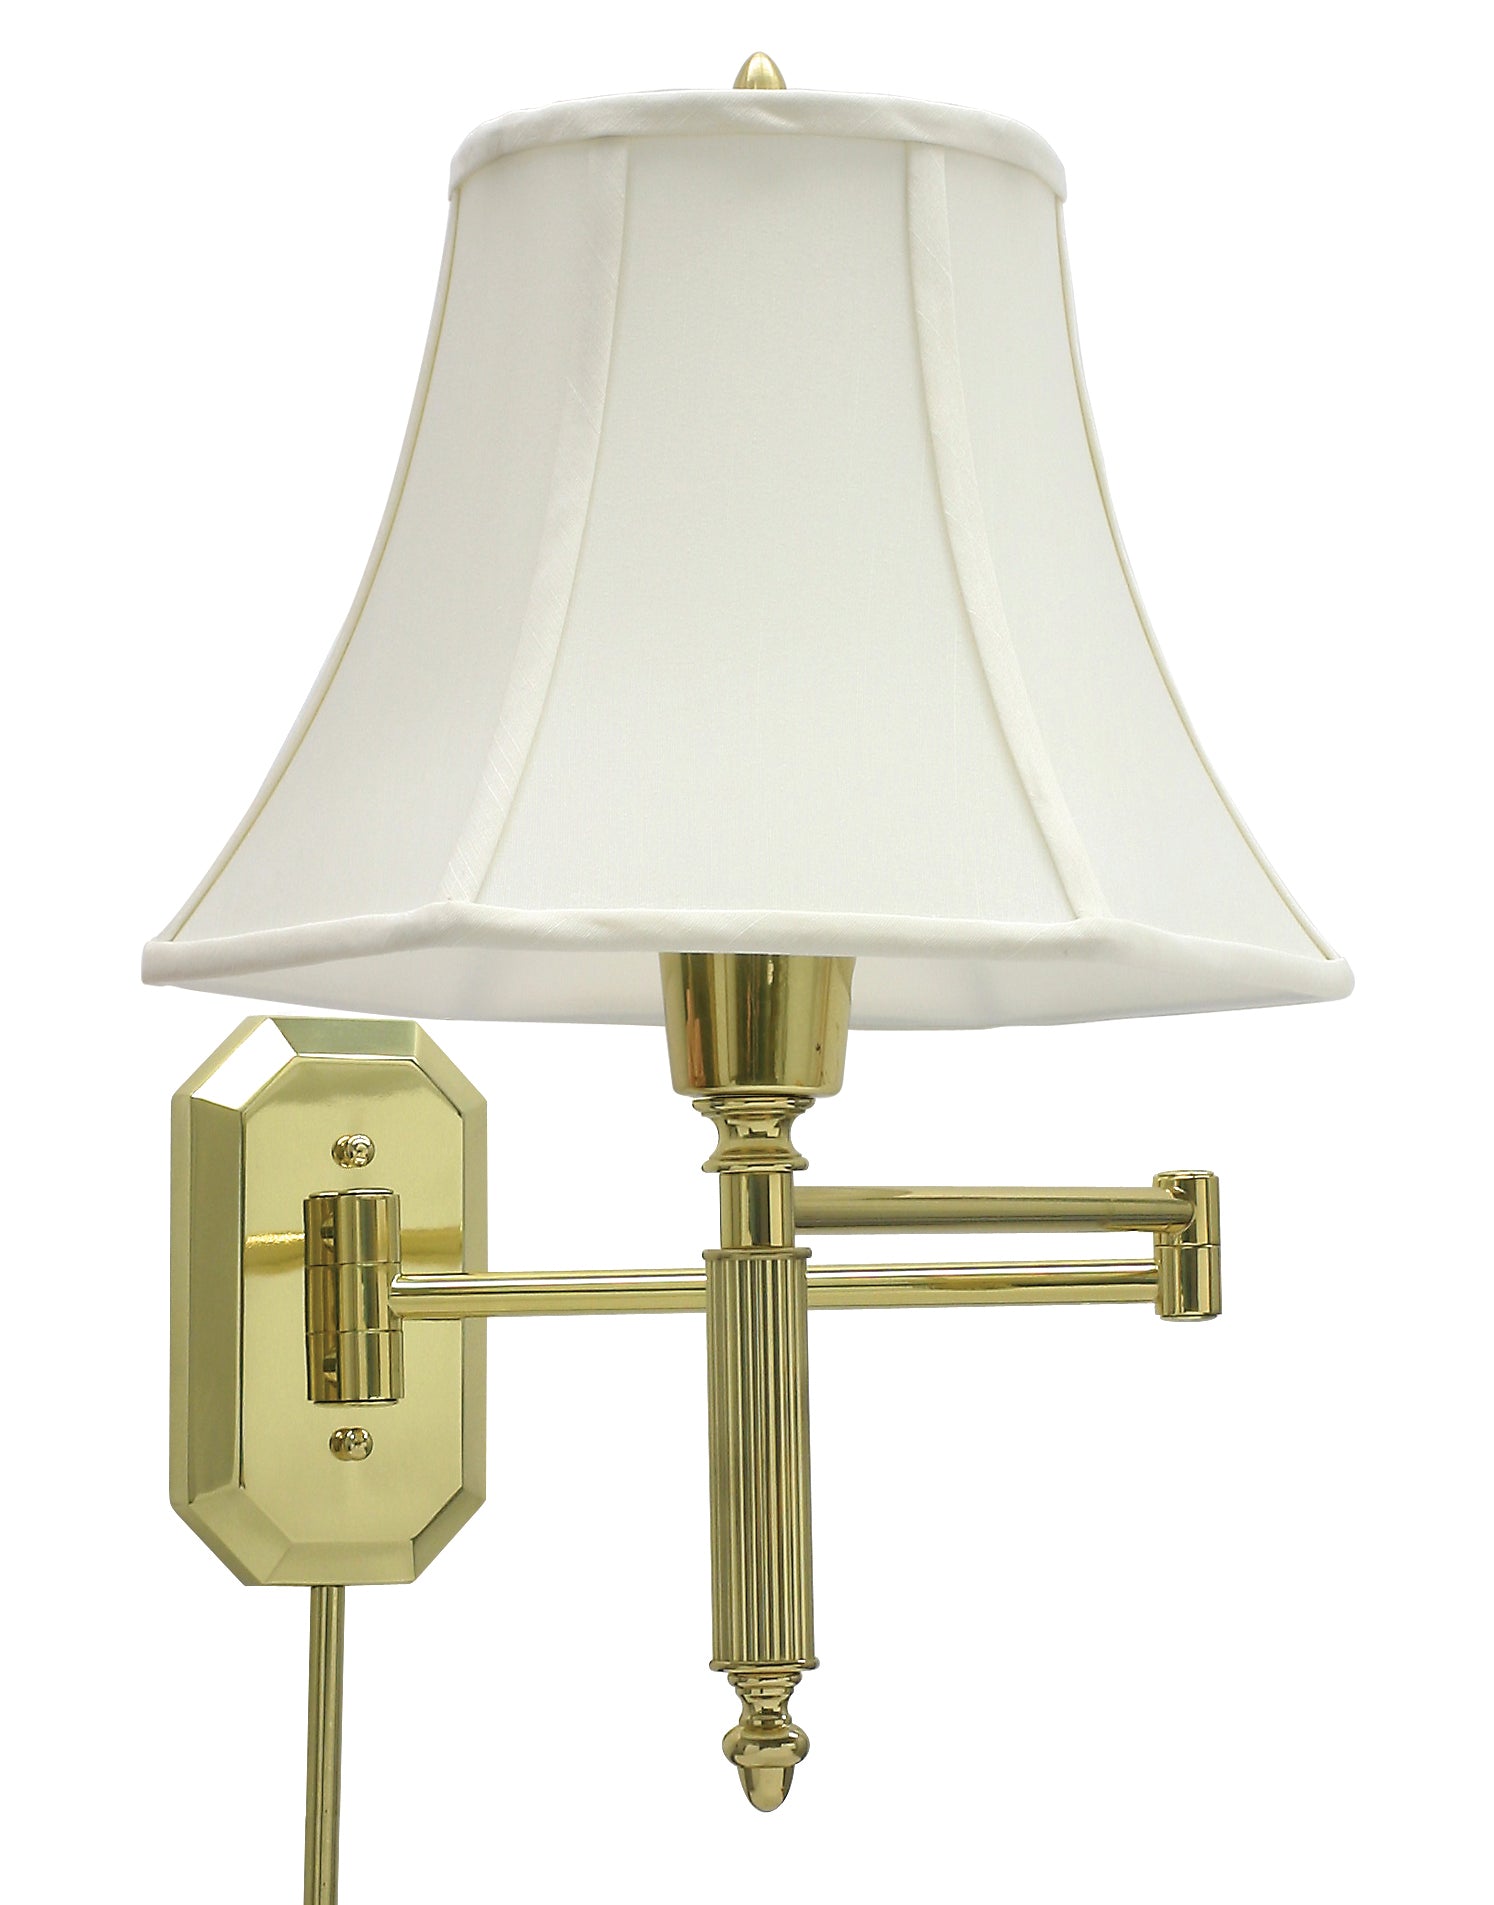 House of Troy Wall Swing Arm Lamp in Polished Brass WS-706